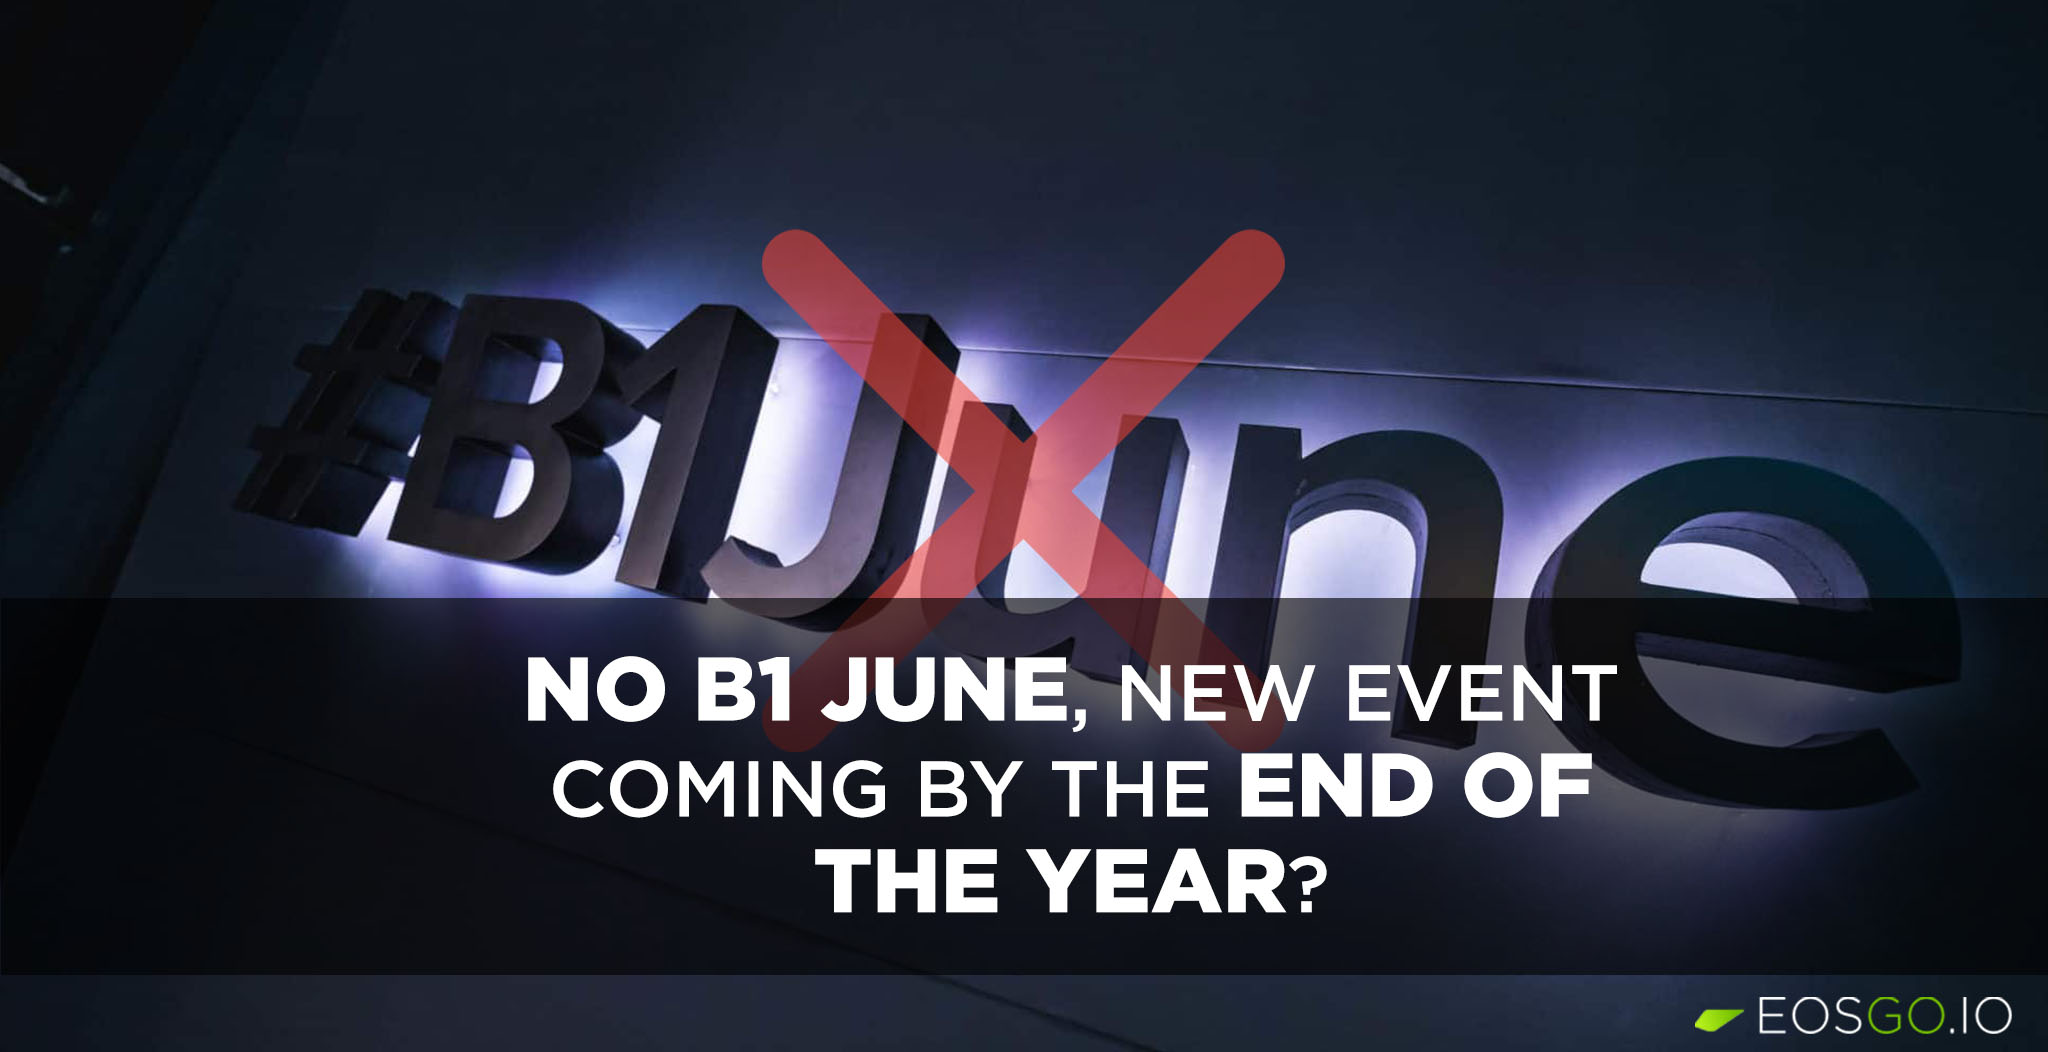 No B1 June. New event coming by the end of the year? 